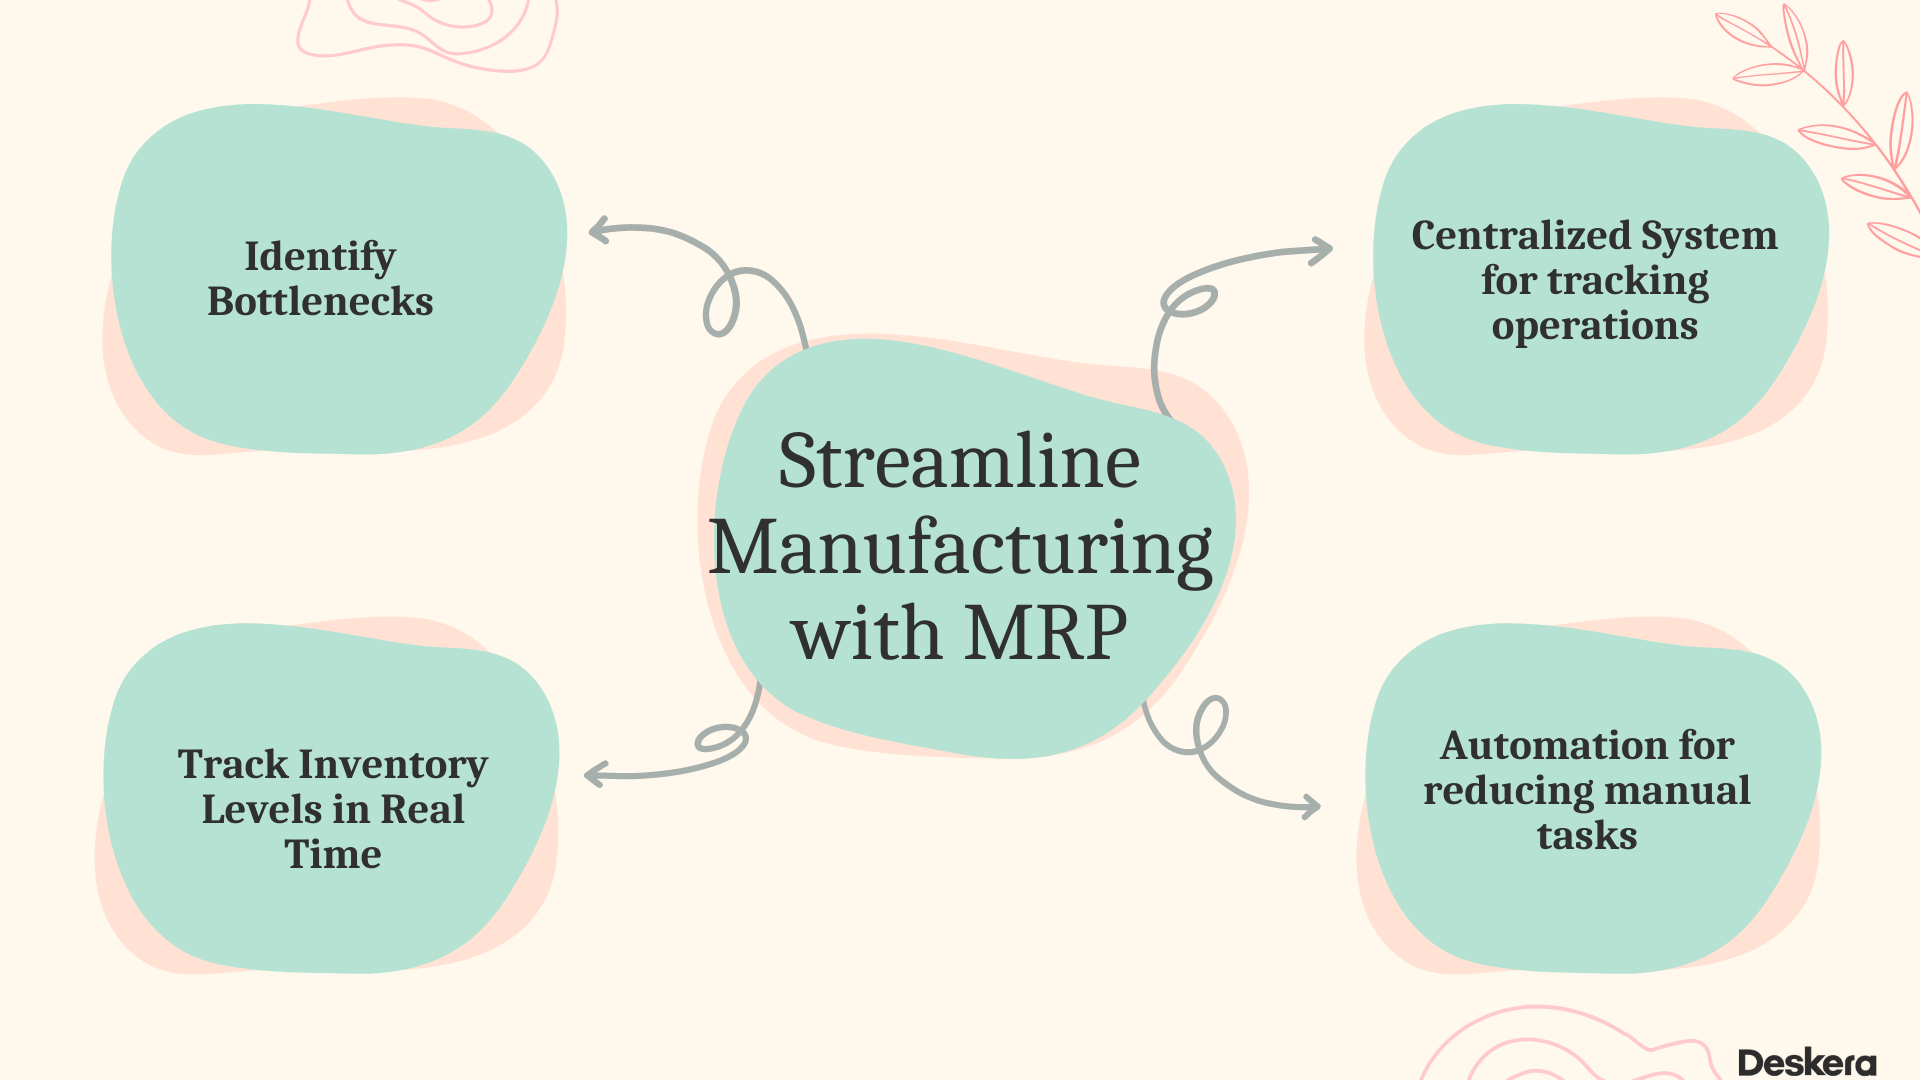 Streamlining Manufacturing with MRP